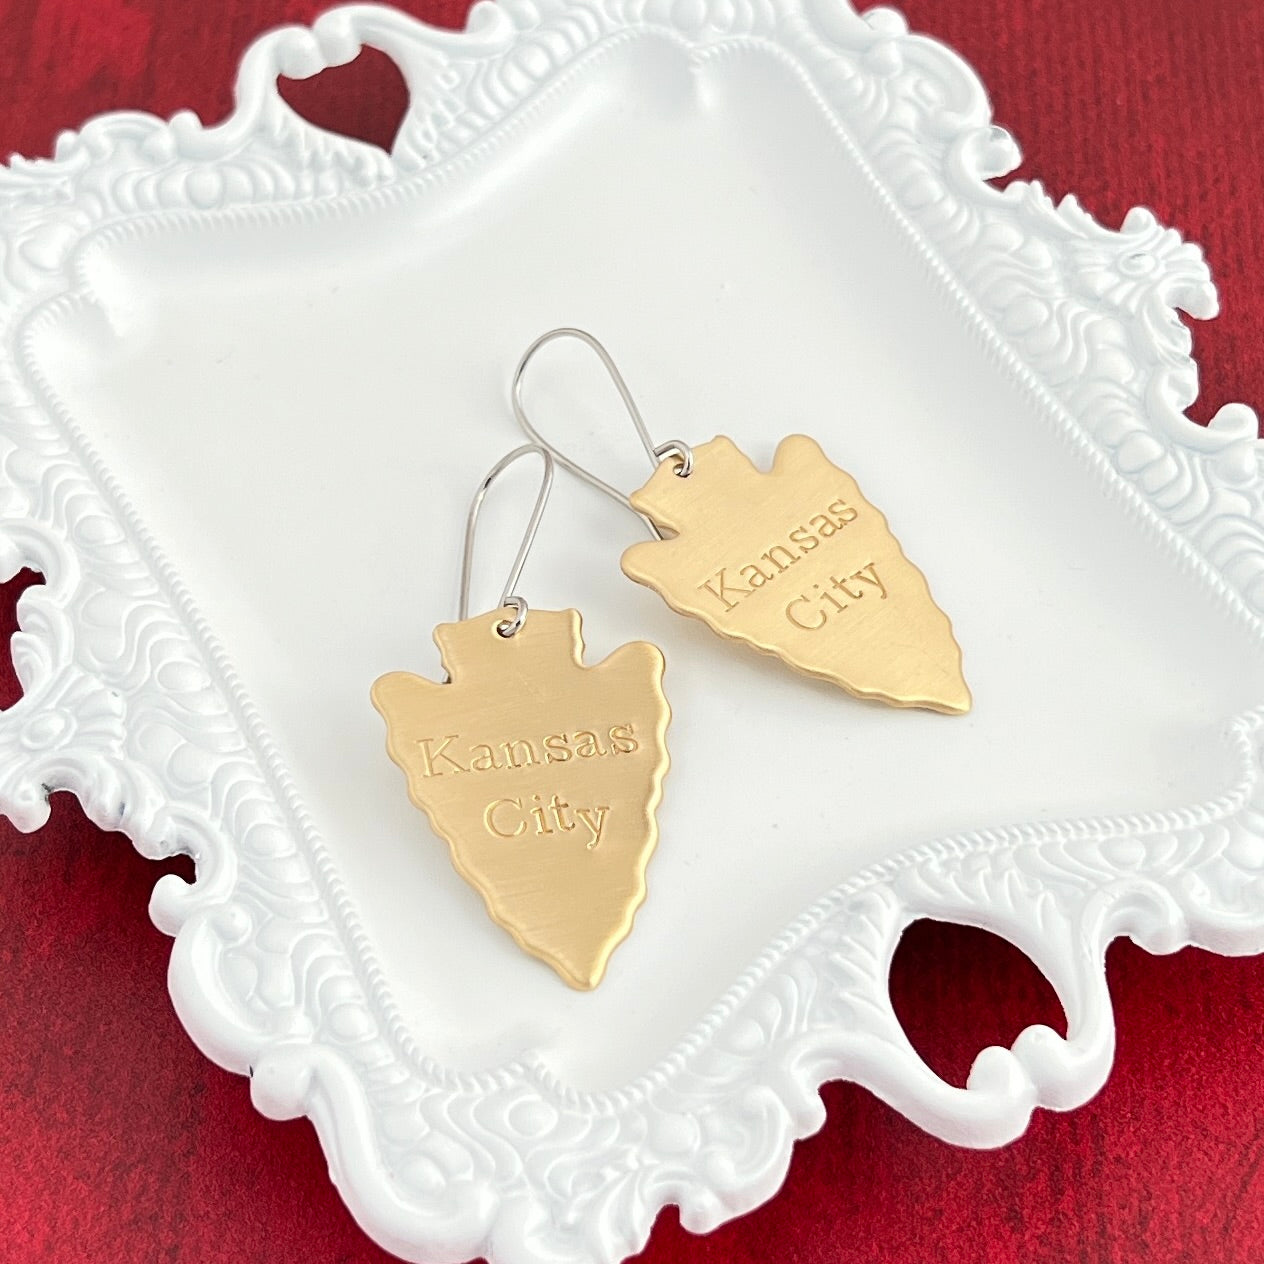 Hand Stamped Arrowhead Earrings- Small